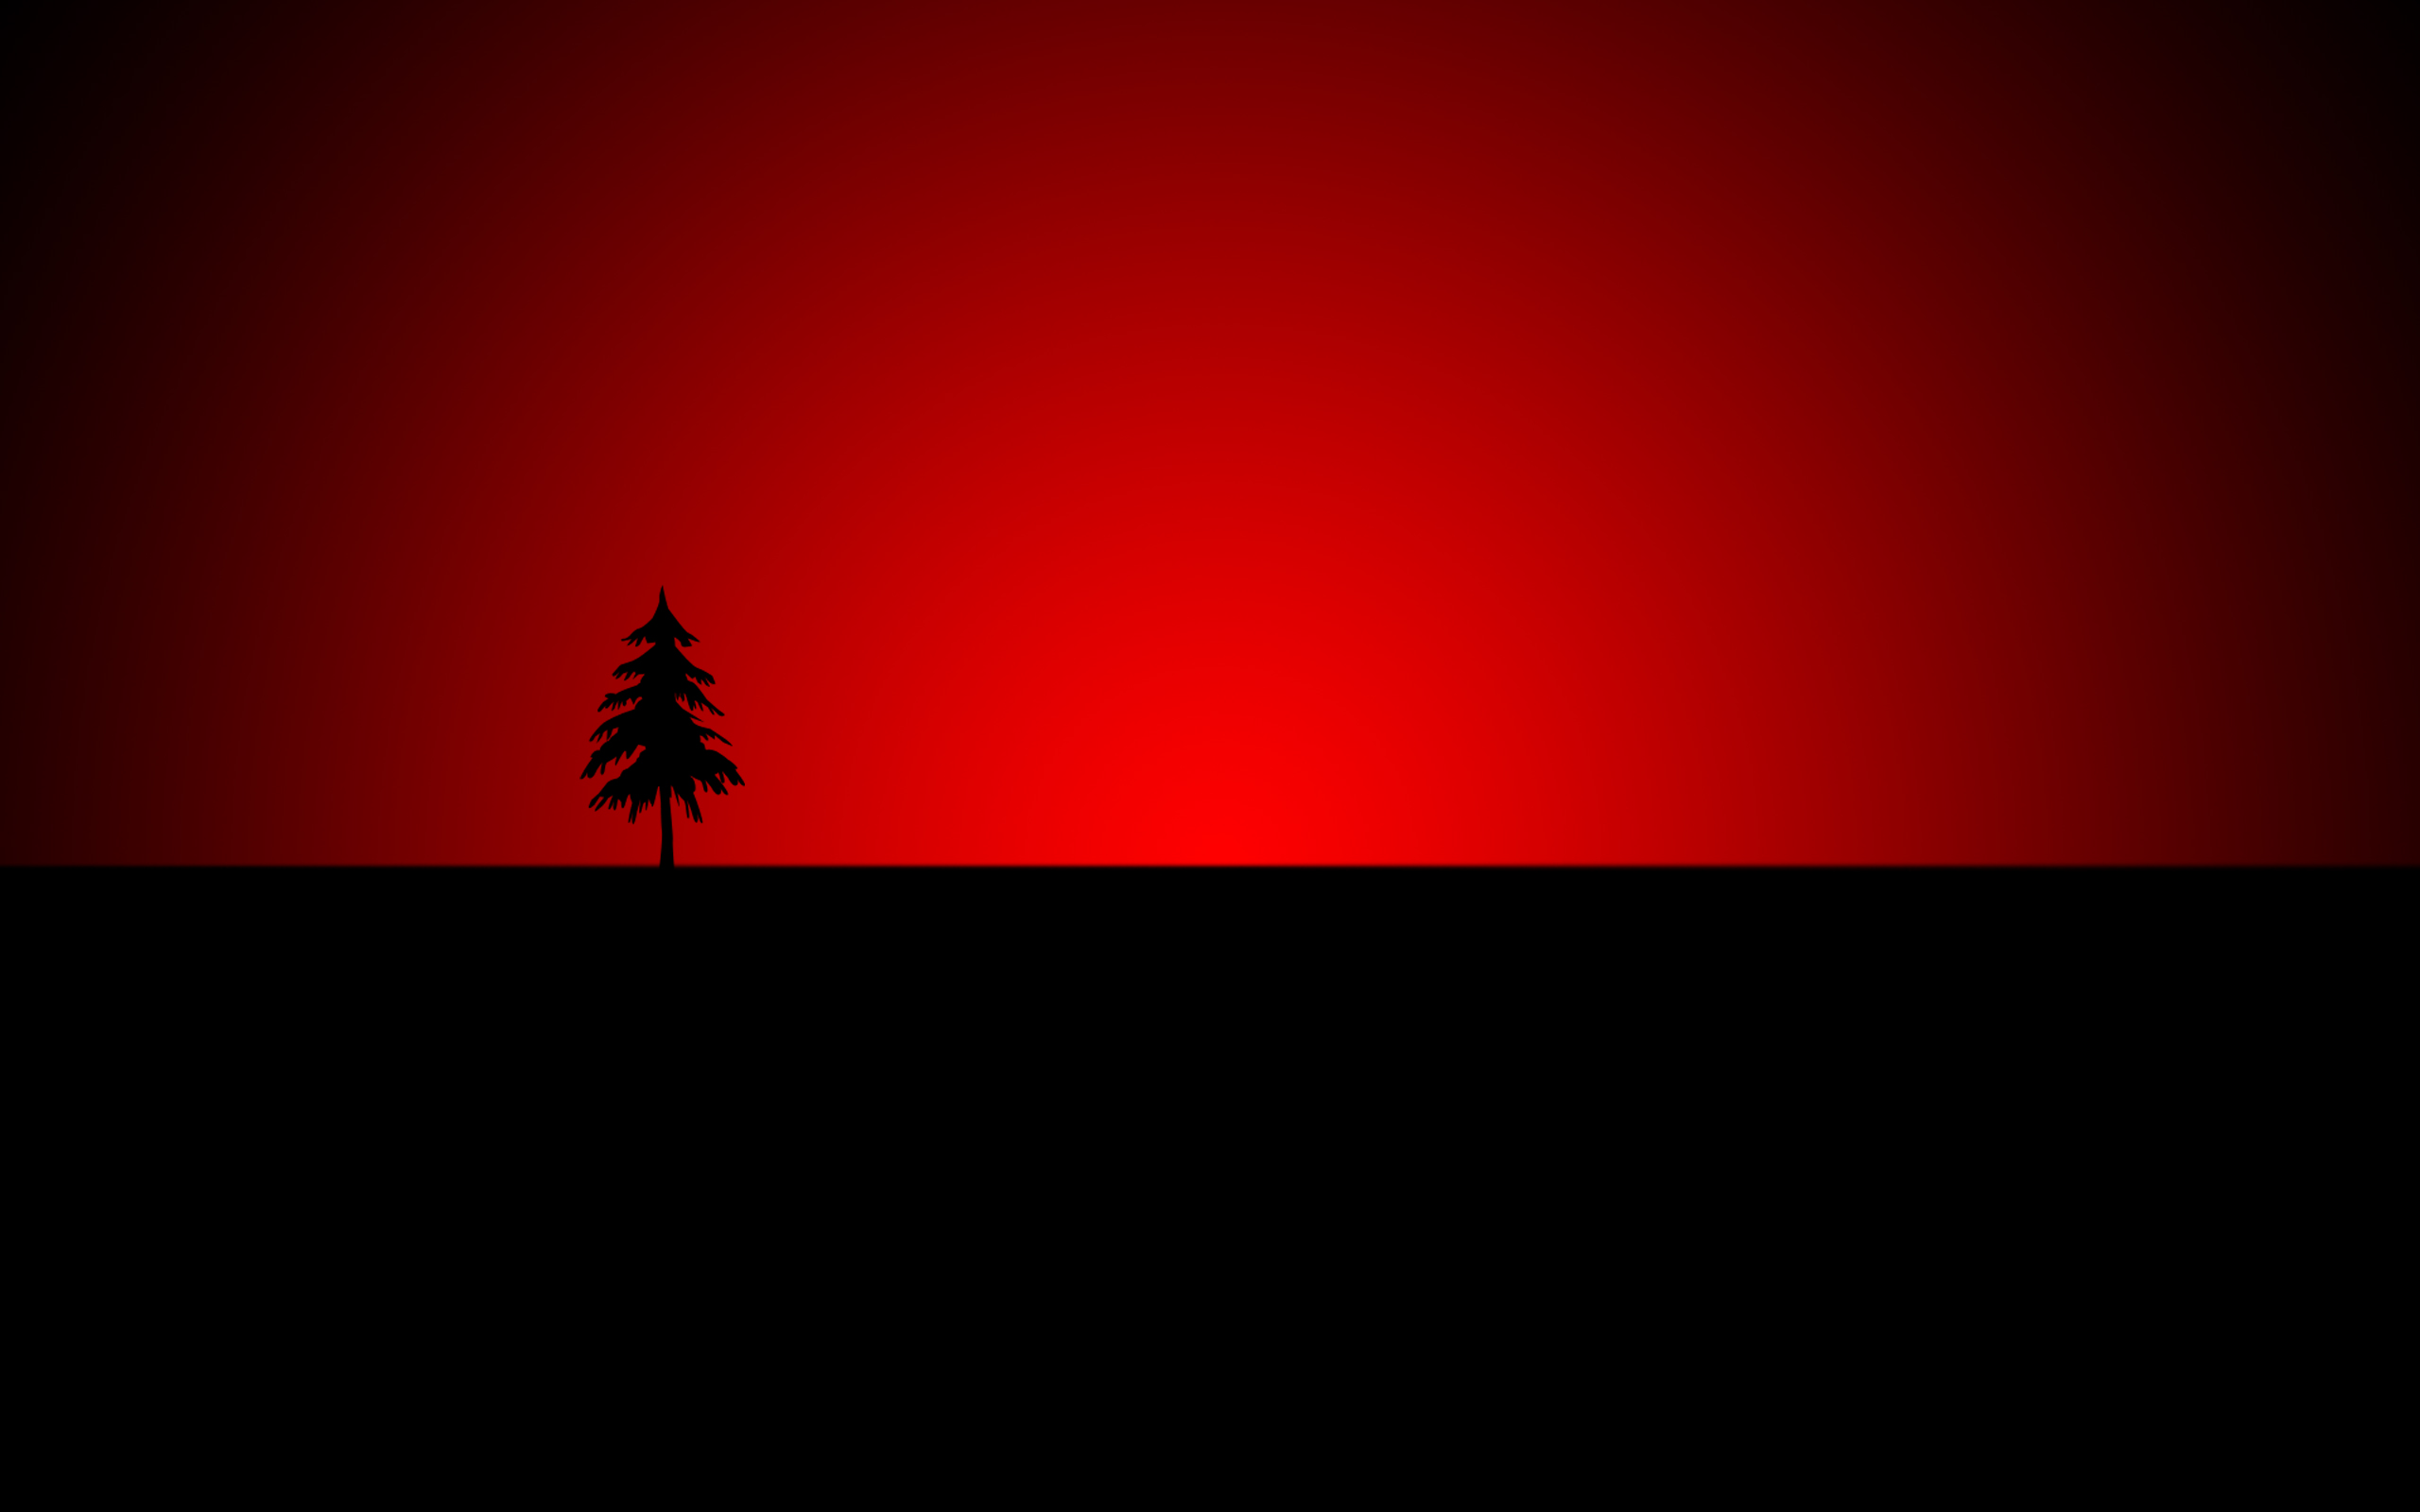 Black and red wallpaper hd